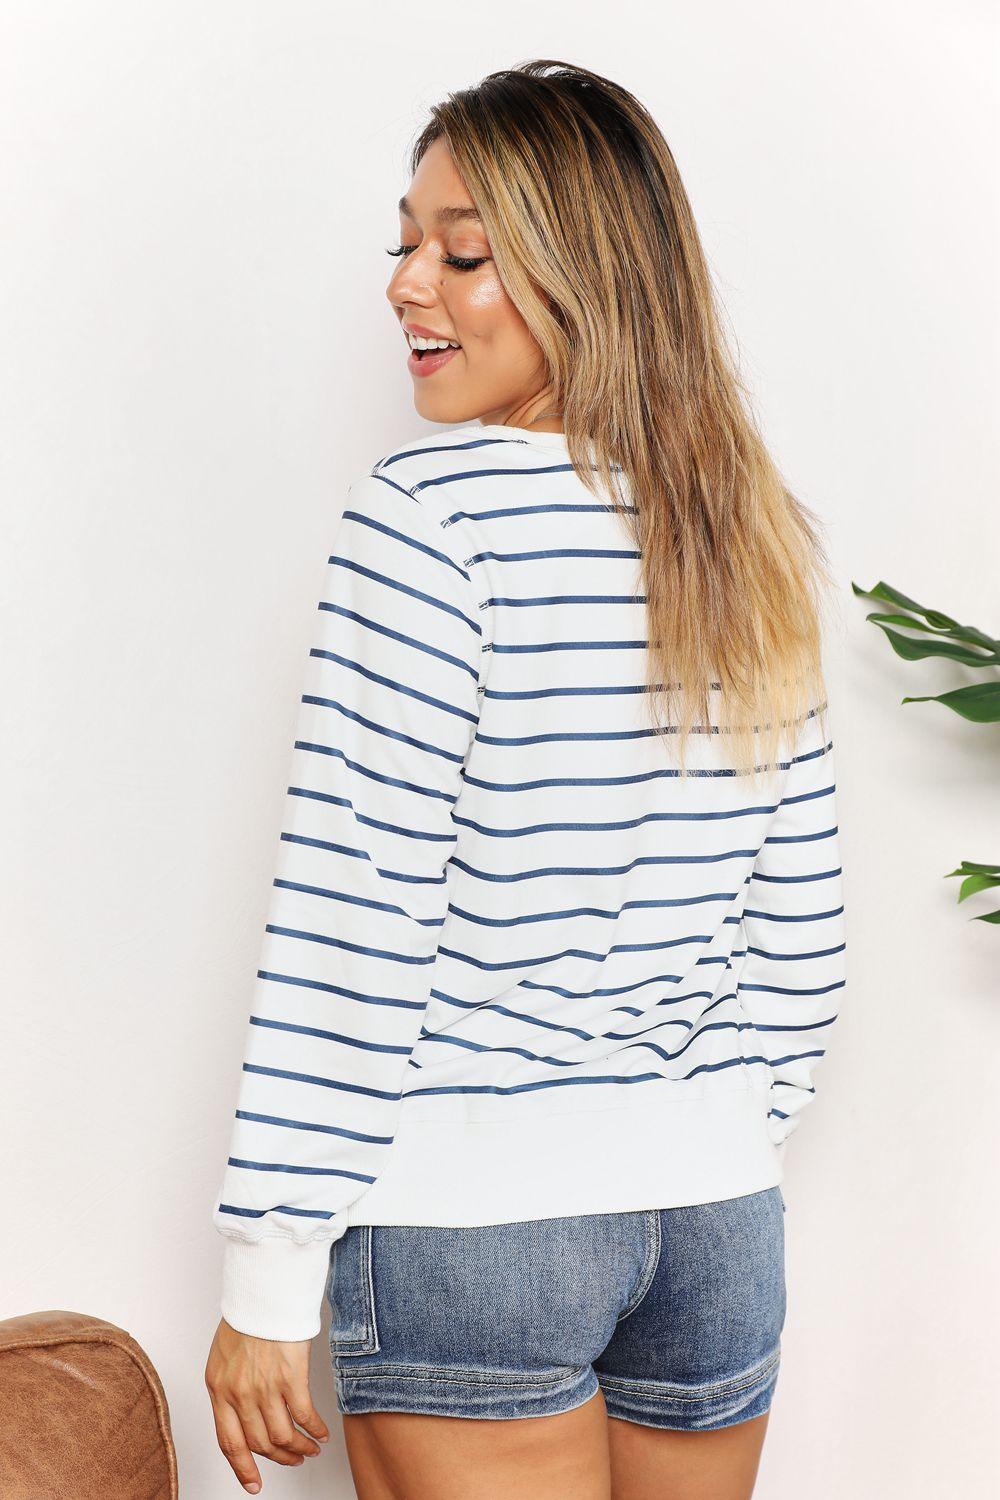 Double Take Striped Long Sleeve Round Neck Top - Lab Fashion, Home & Health